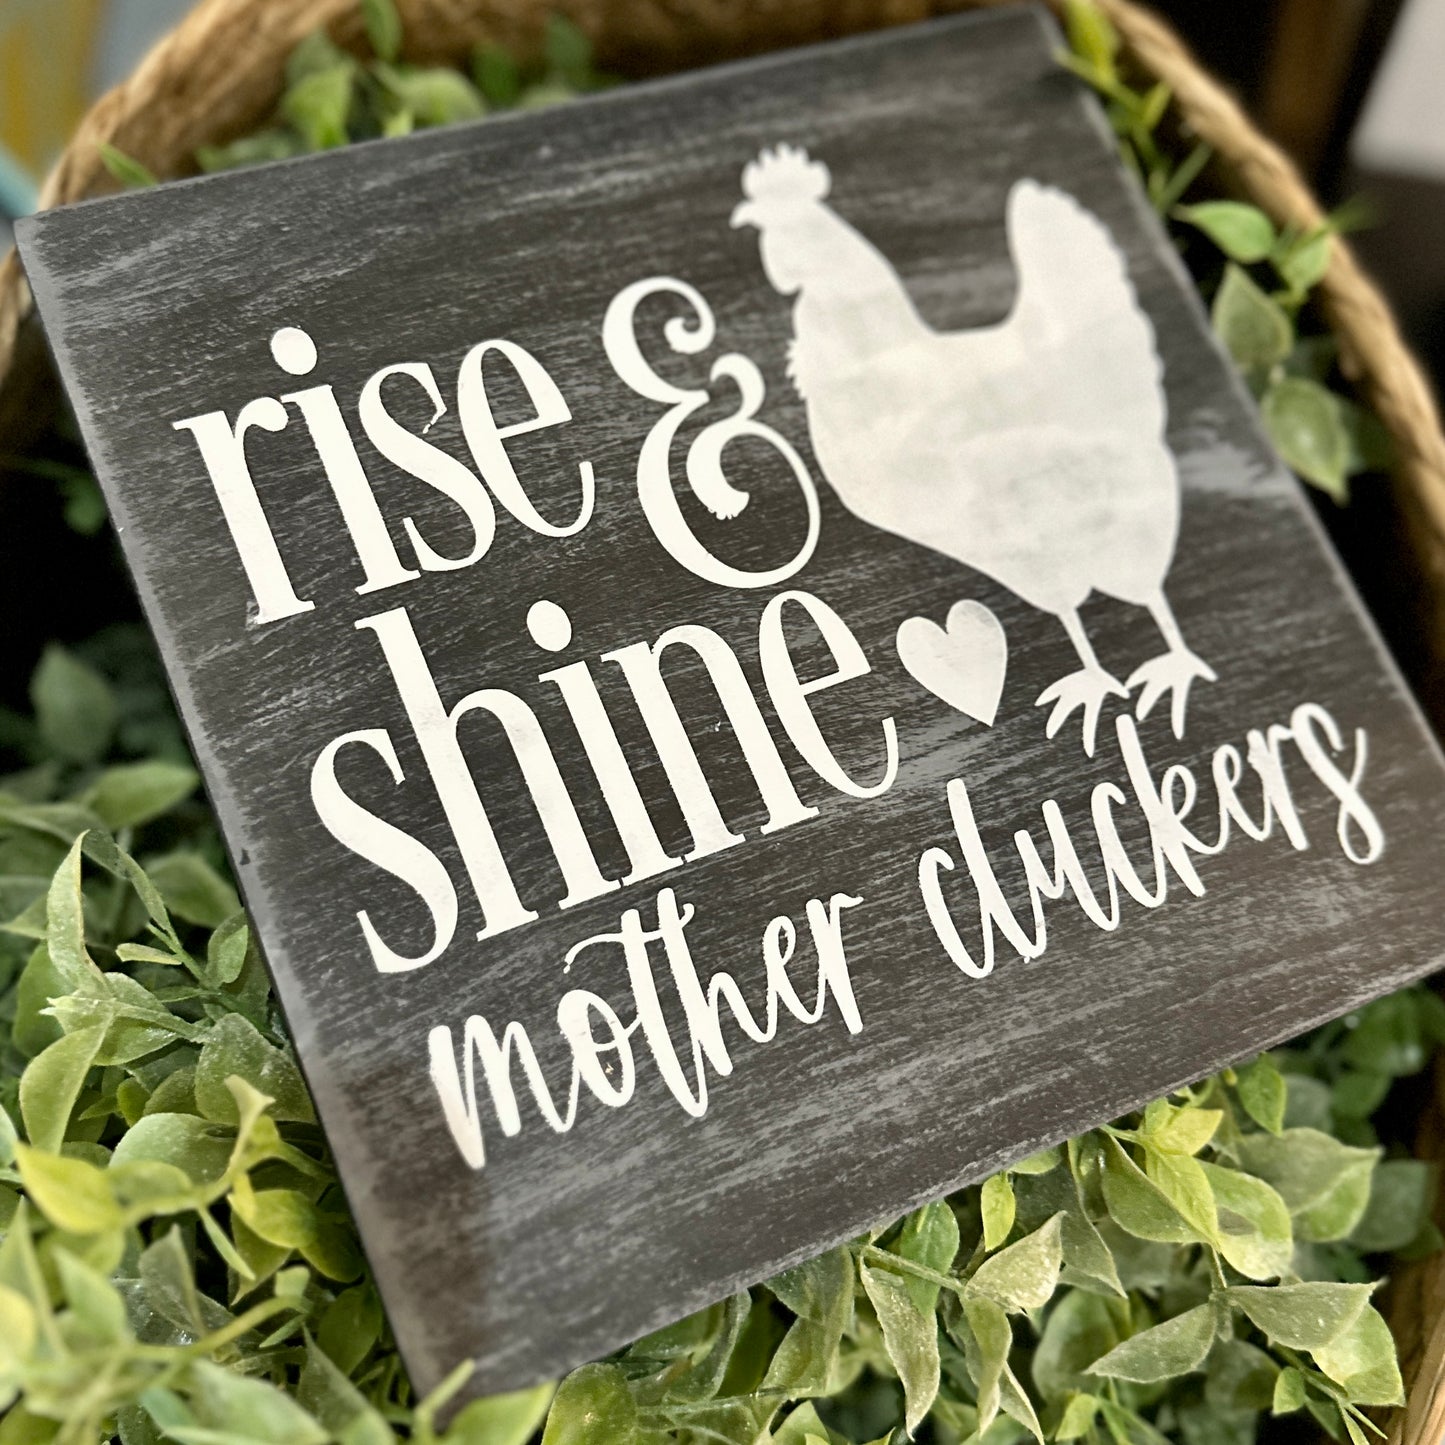 Rise and Shine Mother Cluckers Mini Design P02688